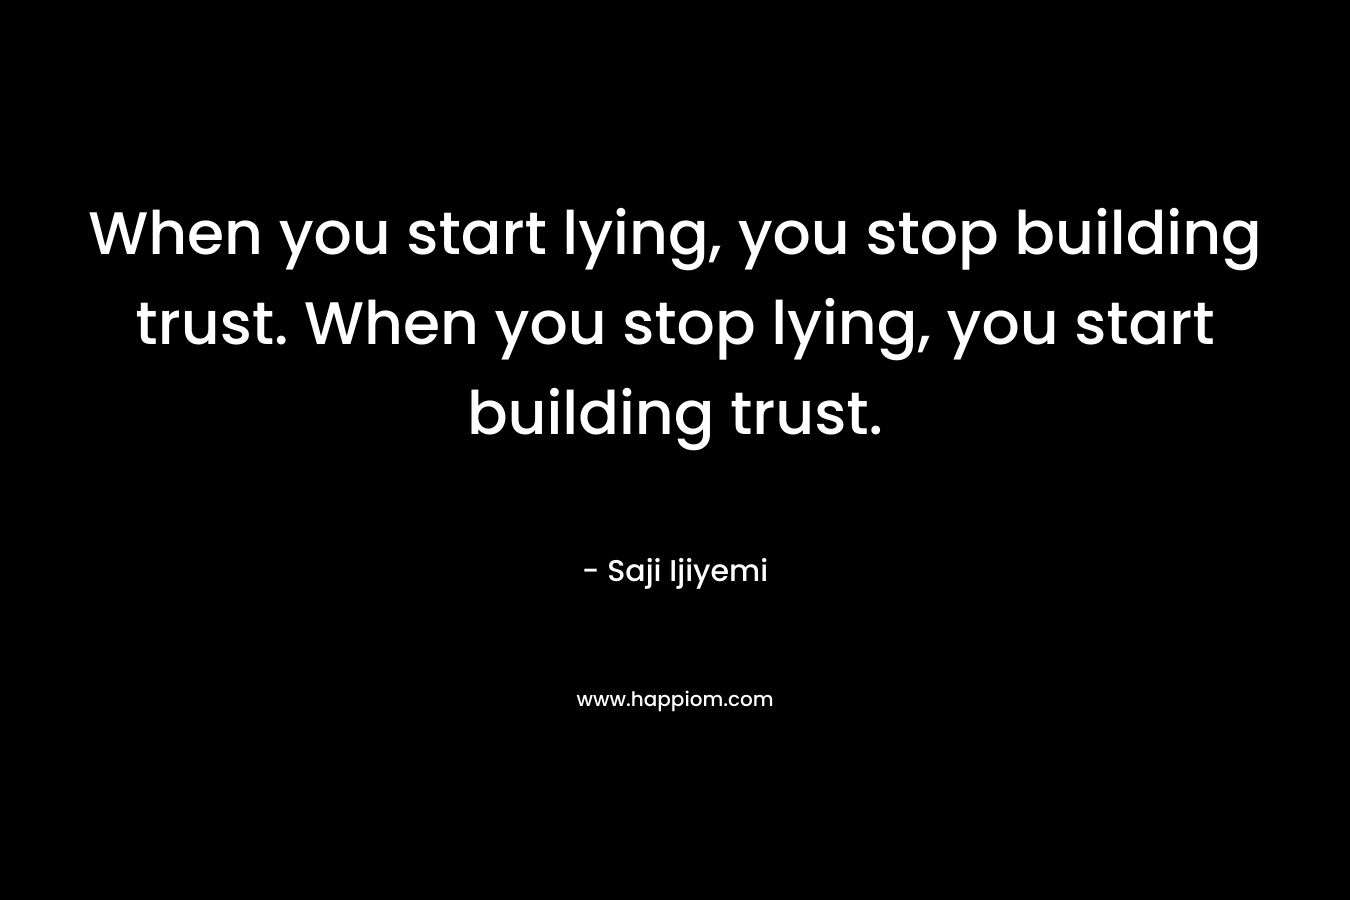 When you start lying, you stop building trust. When you stop lying, you start building trust.